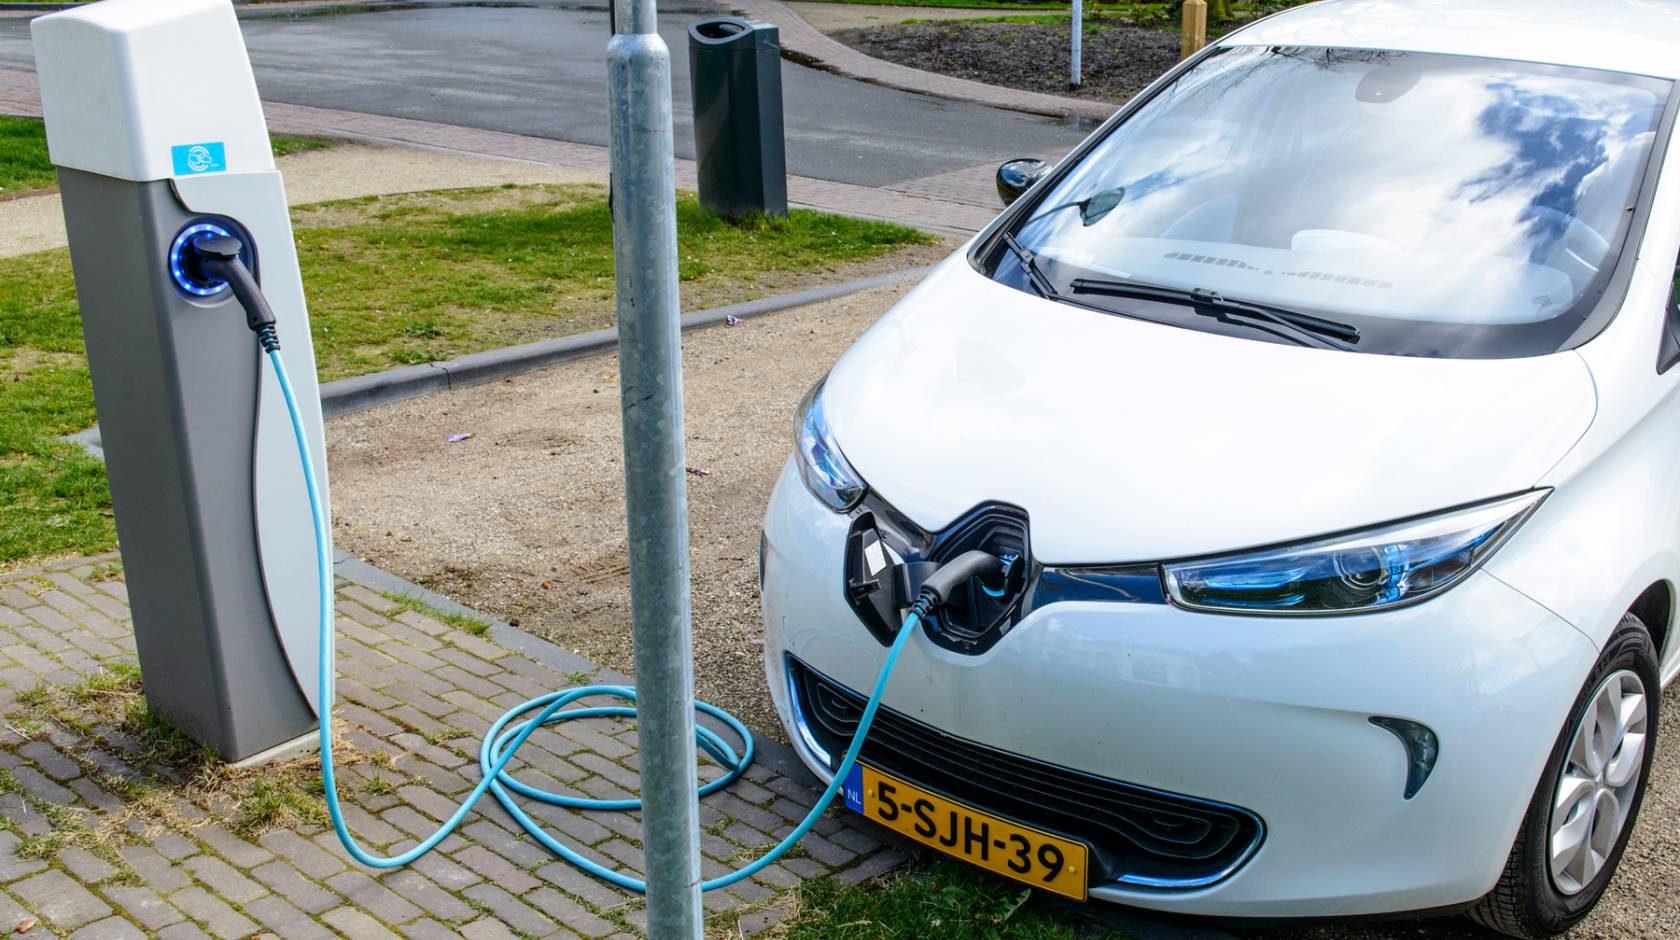 Charging Renault Zoe electric car on a parking place in the city of Zwolle, The Netherlands.